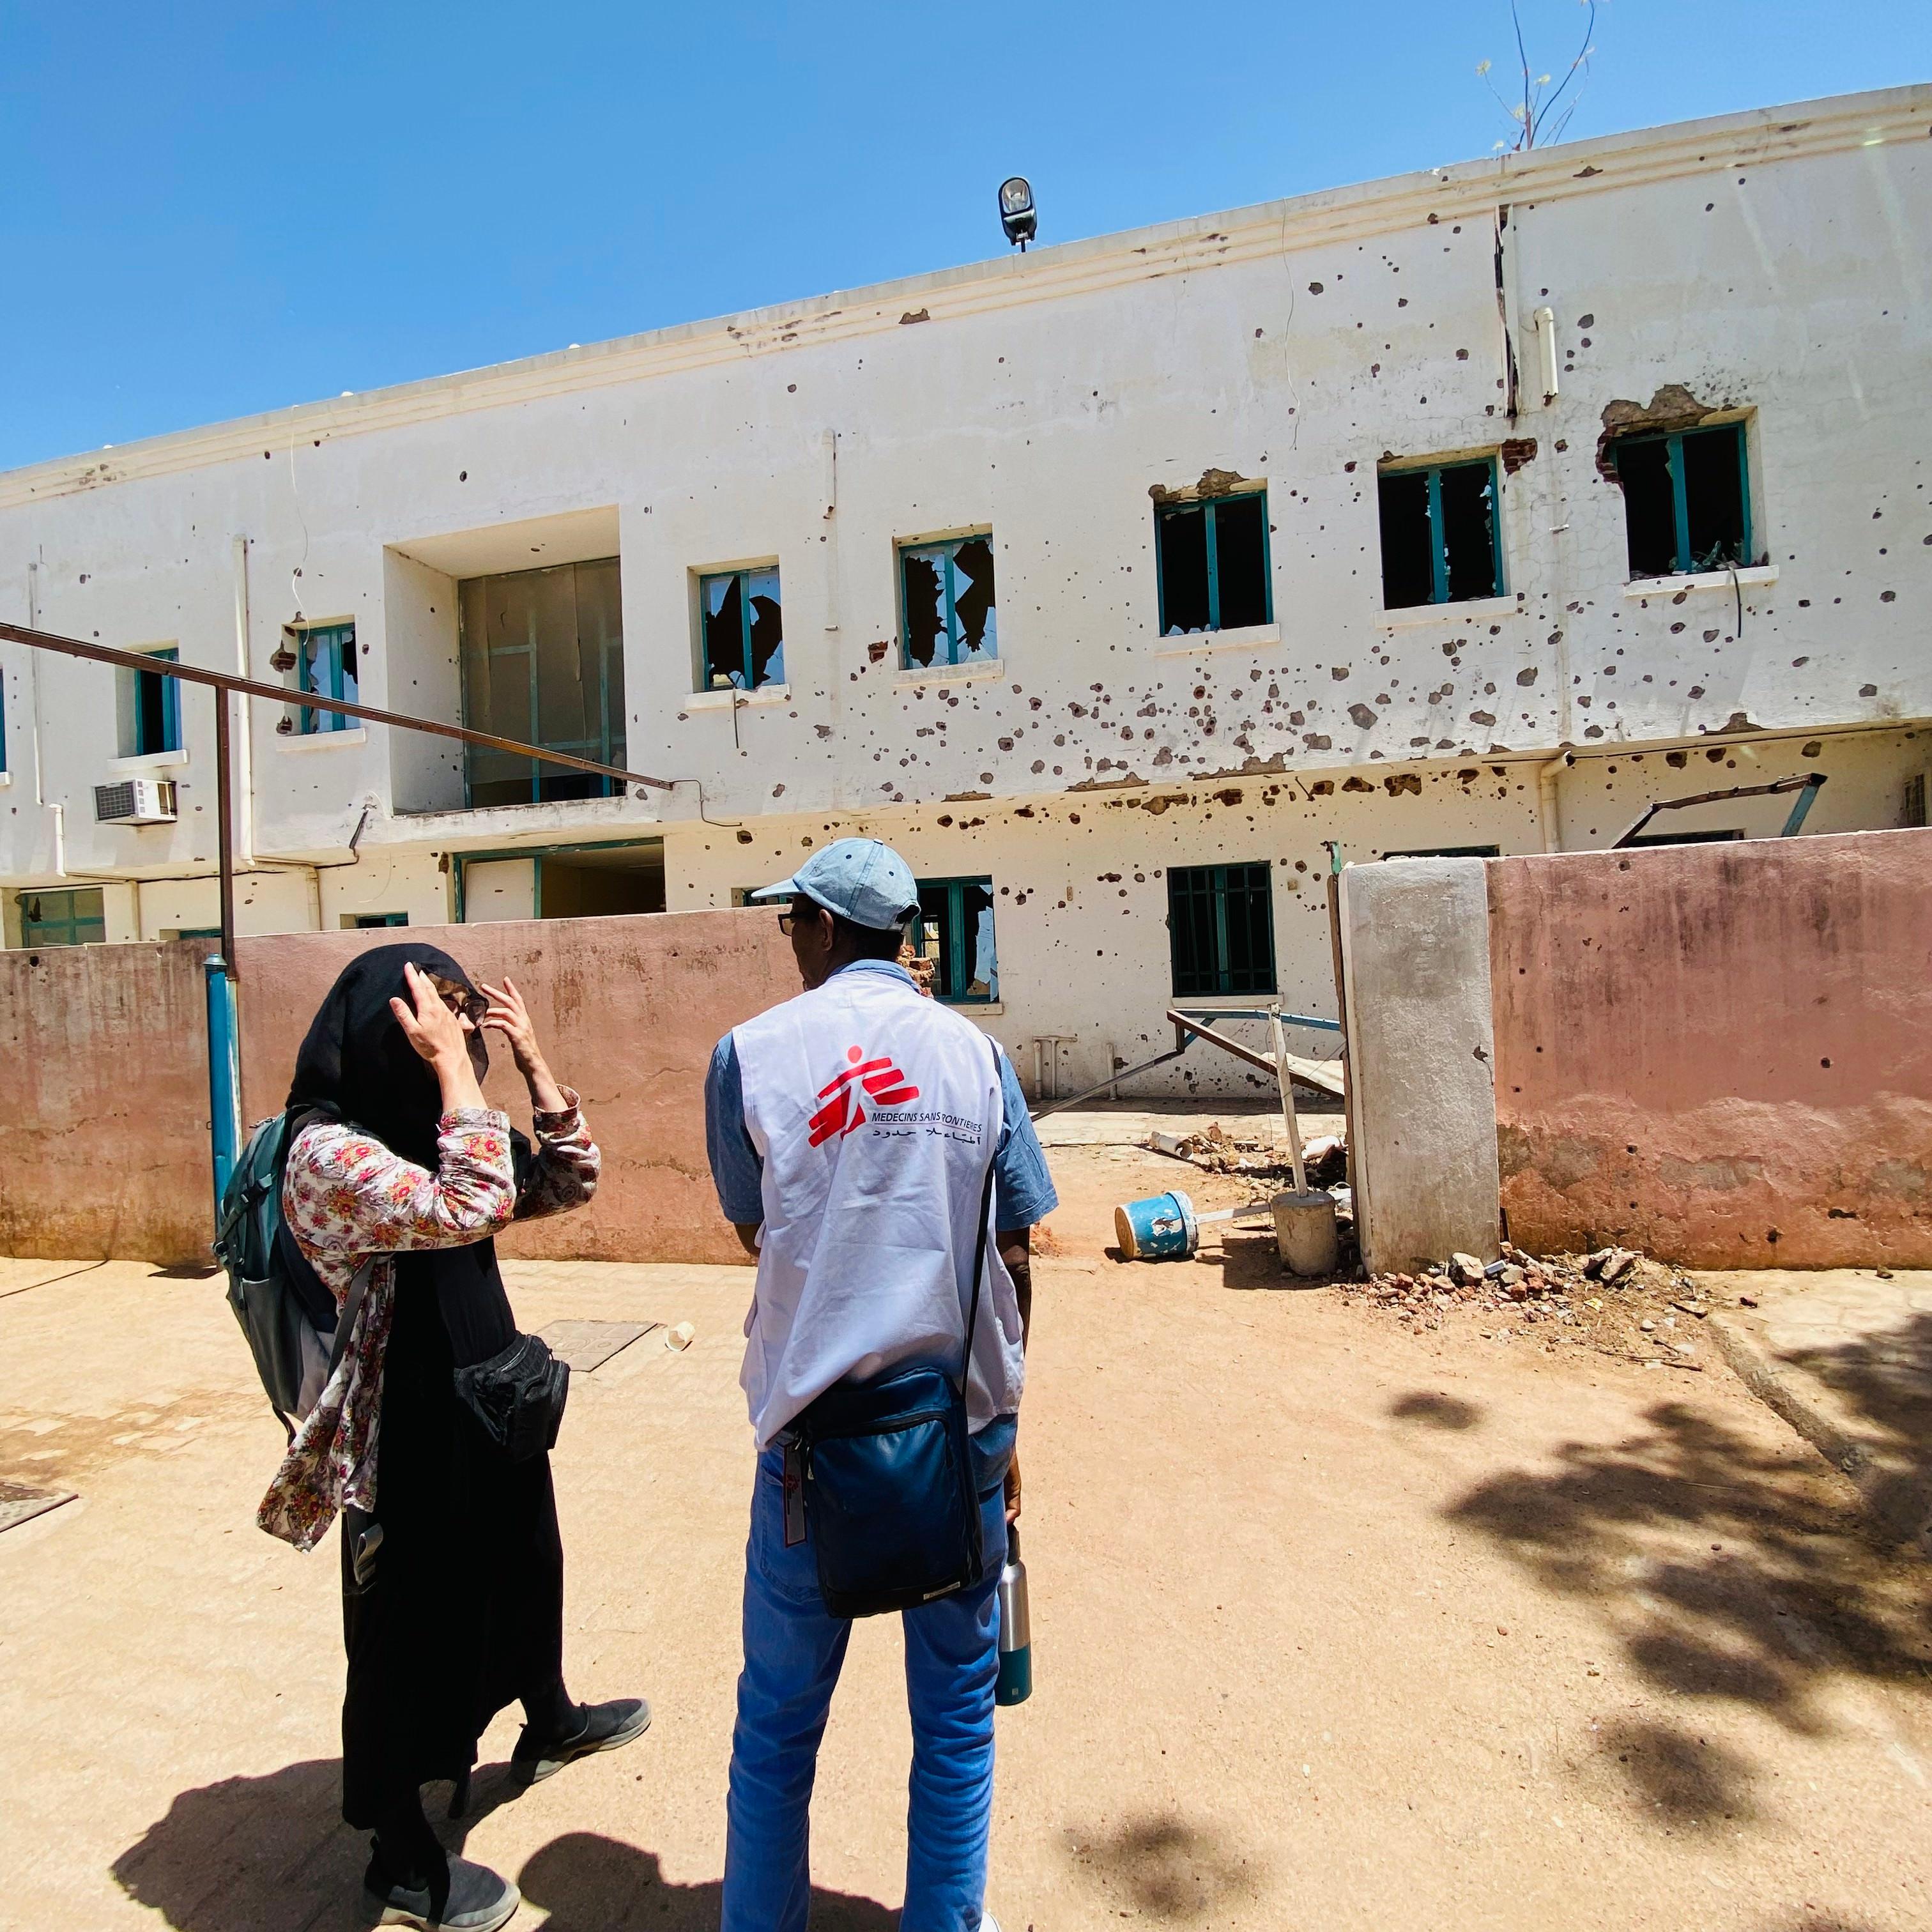 MSF teams reassessing the damage at an MSF-supported health facility in Sudan, following a looting and storming incident. ©MSF 